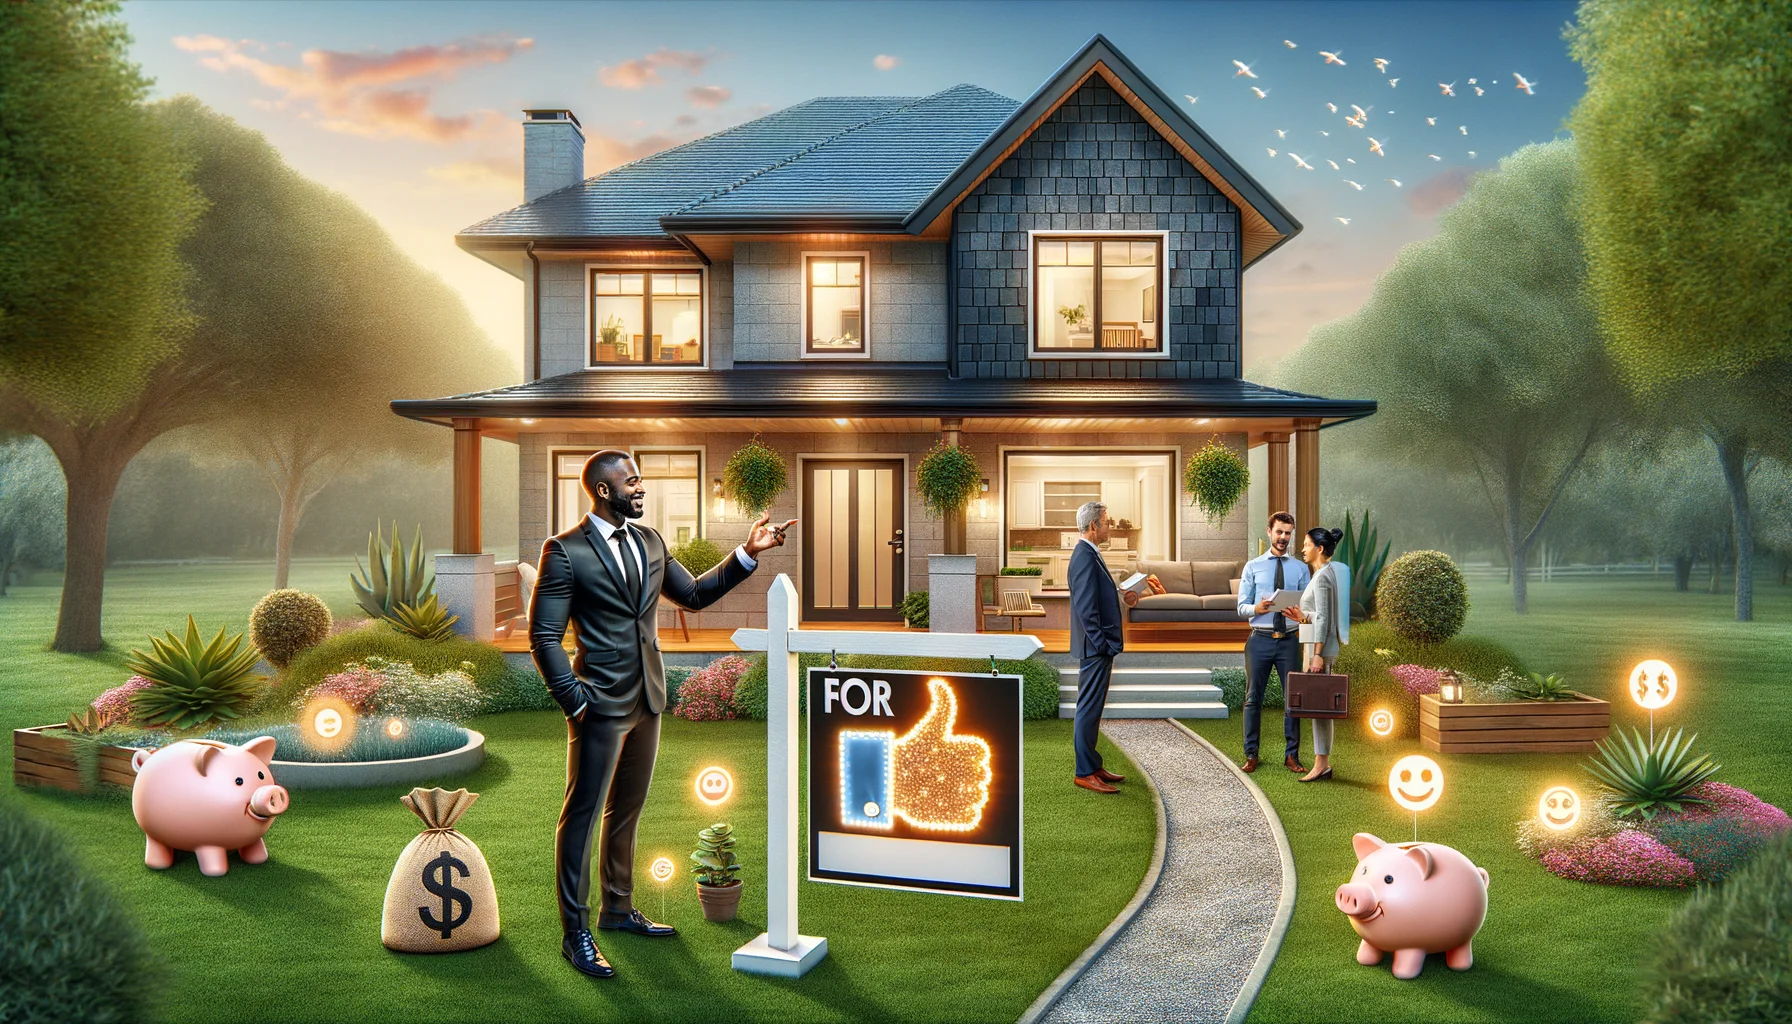 Create an amusingly realistic image detailing the best-case scenario of selling a home. The image would include a sparkling clean, beautifully decorated modern house enveloped by a lush, manicured garden. Outside, there's a cardboard cutout of a realtor - a Black woman professionally dressed, pointing towards a 'For Sale' sign glowing with an irresistible aura. Inside the house, a Caucasian man and a Middle-Eastern woman discuss with a prospective buyer - represented by a thumbs-up icon. Finally, add subtle visual cues like overflowing piggy banks and happy emojis interspersed to represent a successful transaction.